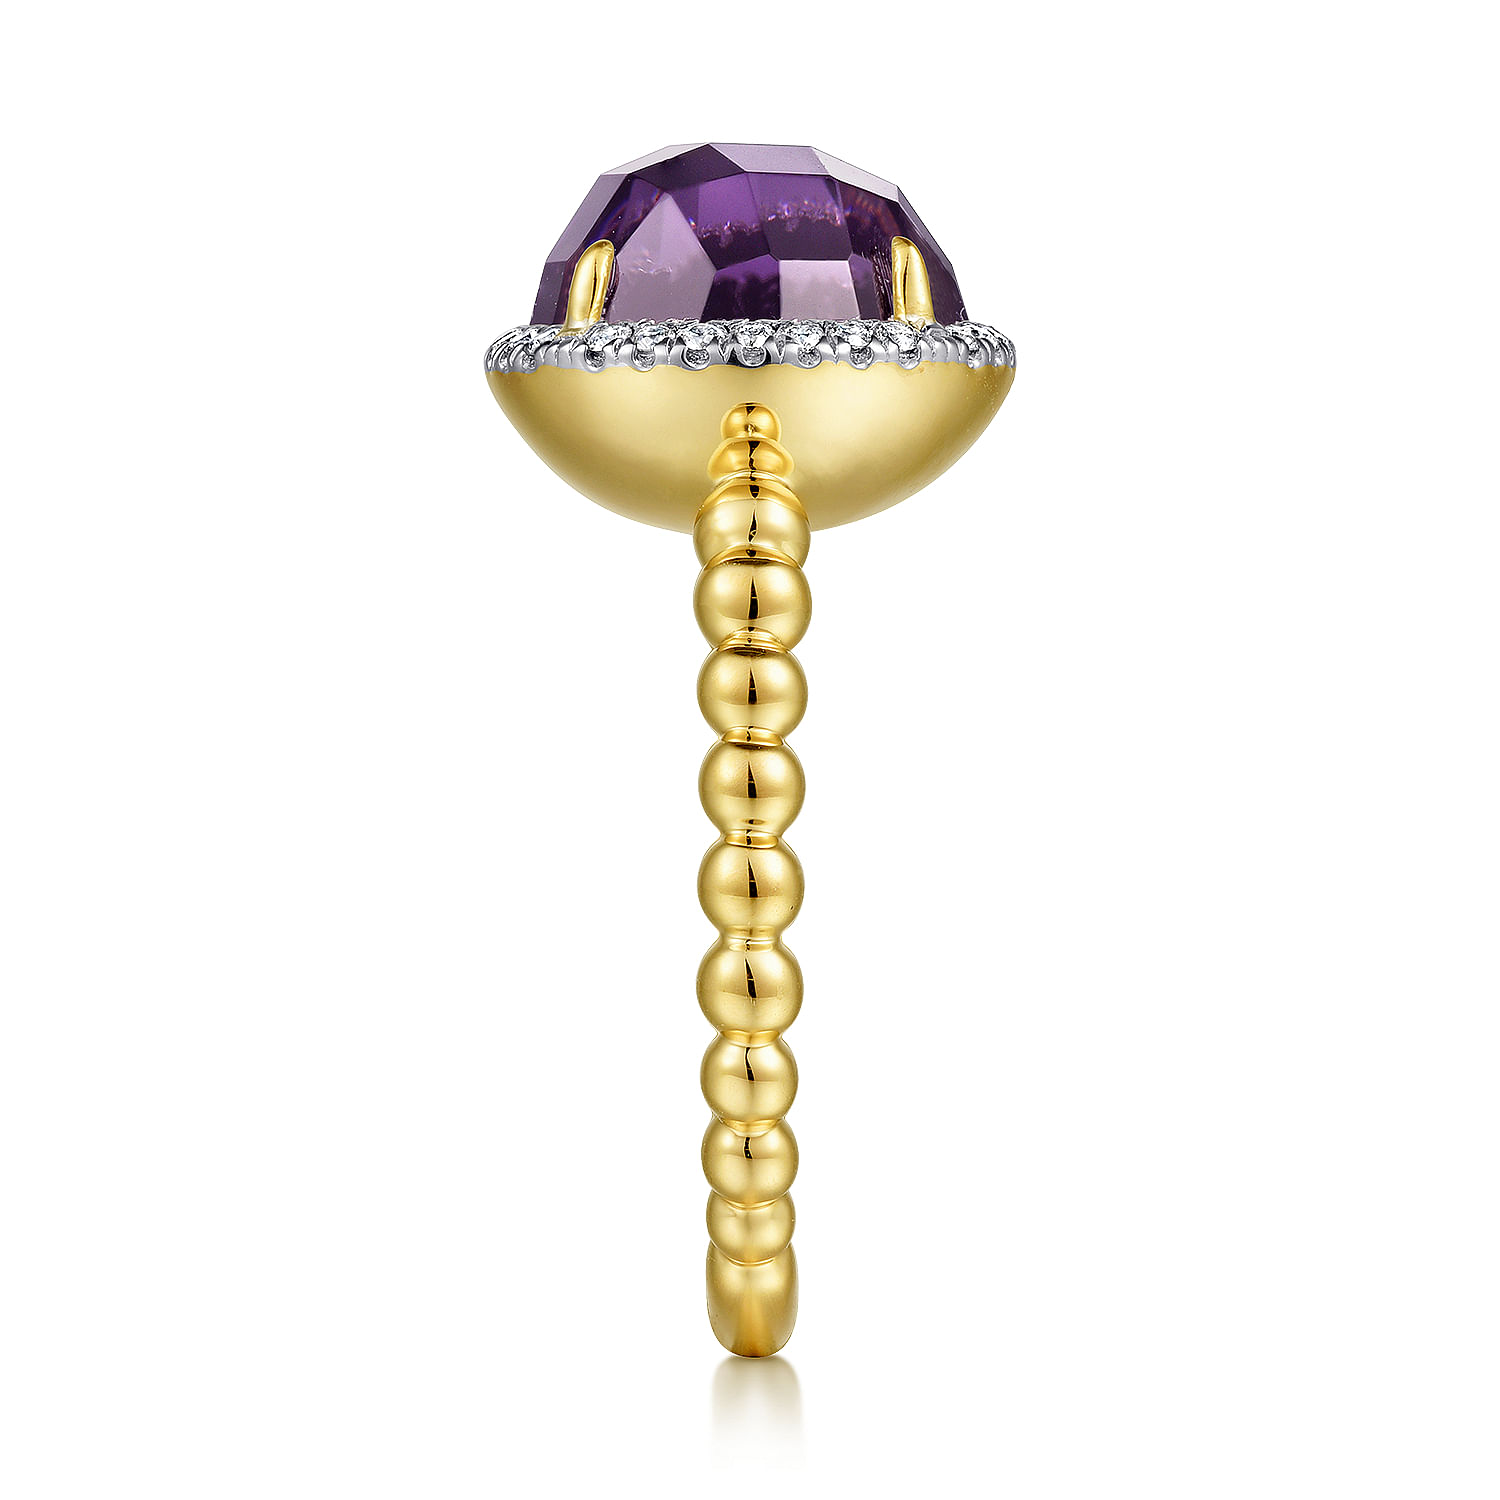 14K Yellow Gold Round Amethyst and Diamond Halo Ring